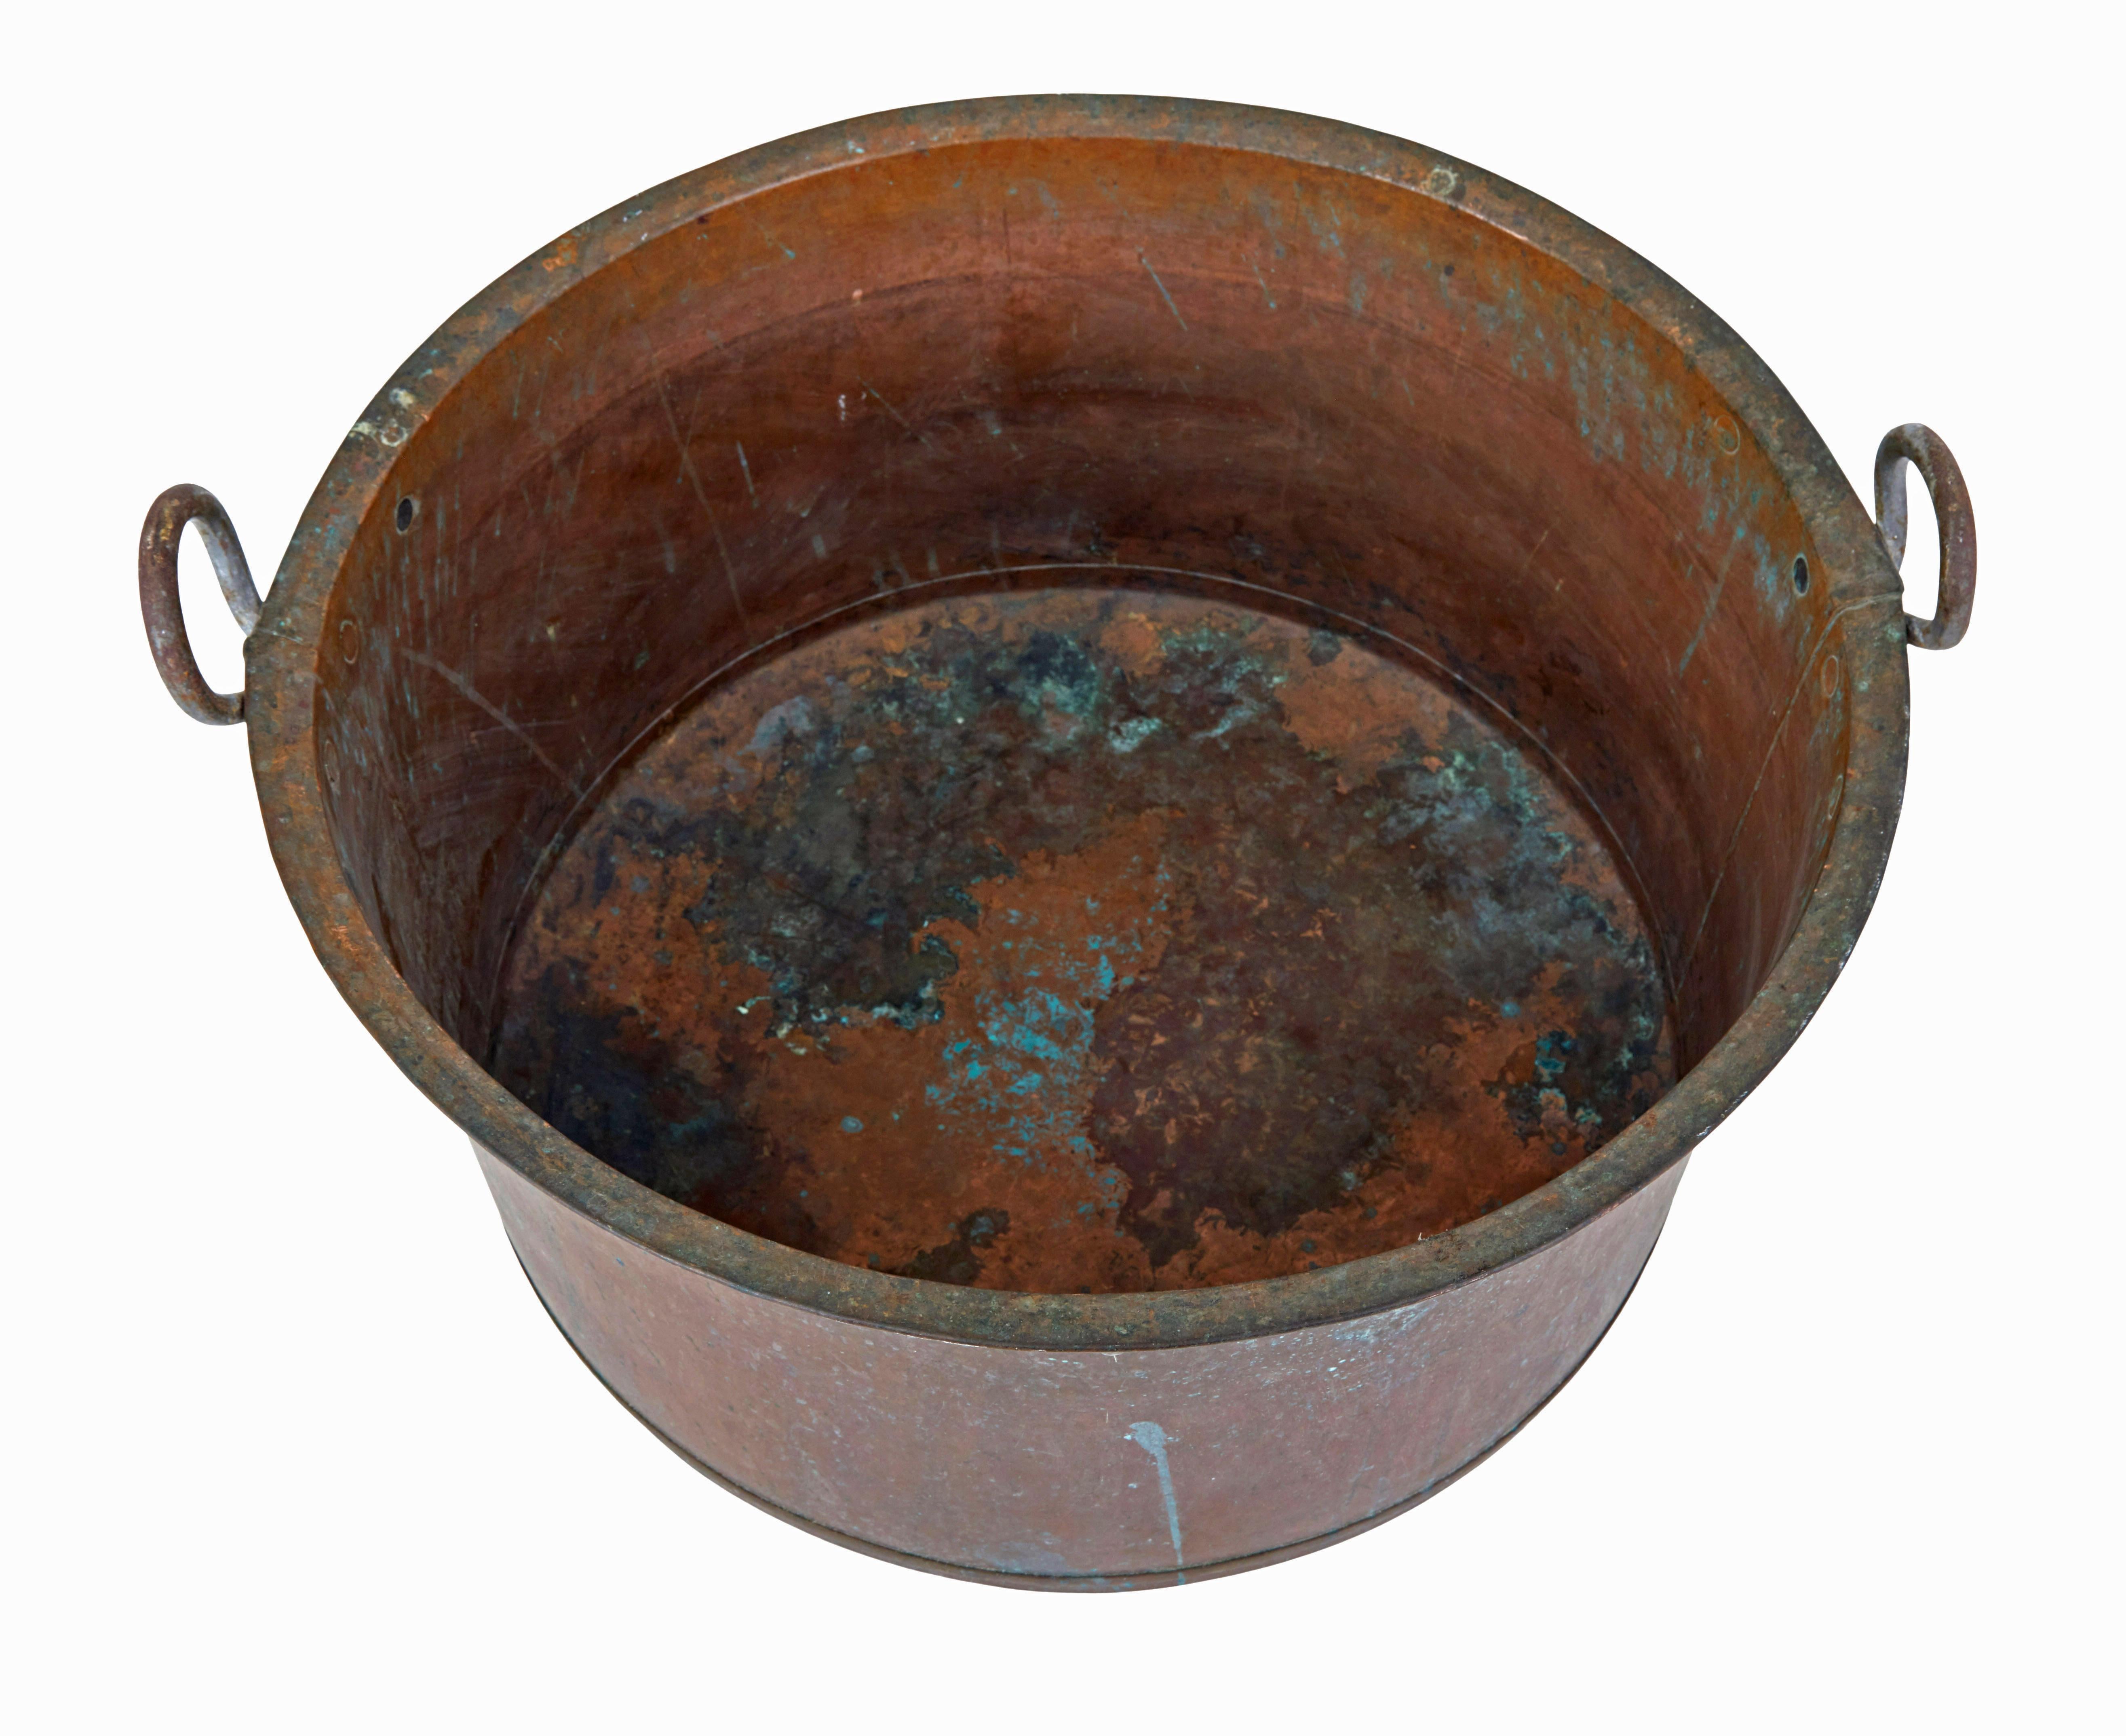 Late 19th century copper cooking vessel circa 1890.

Good quality piece of 19th century metalware, this large cooking vessel now provides the ideal fireside storage for logs or kindling.

Made from copper with applied looped handles.

Desirable and